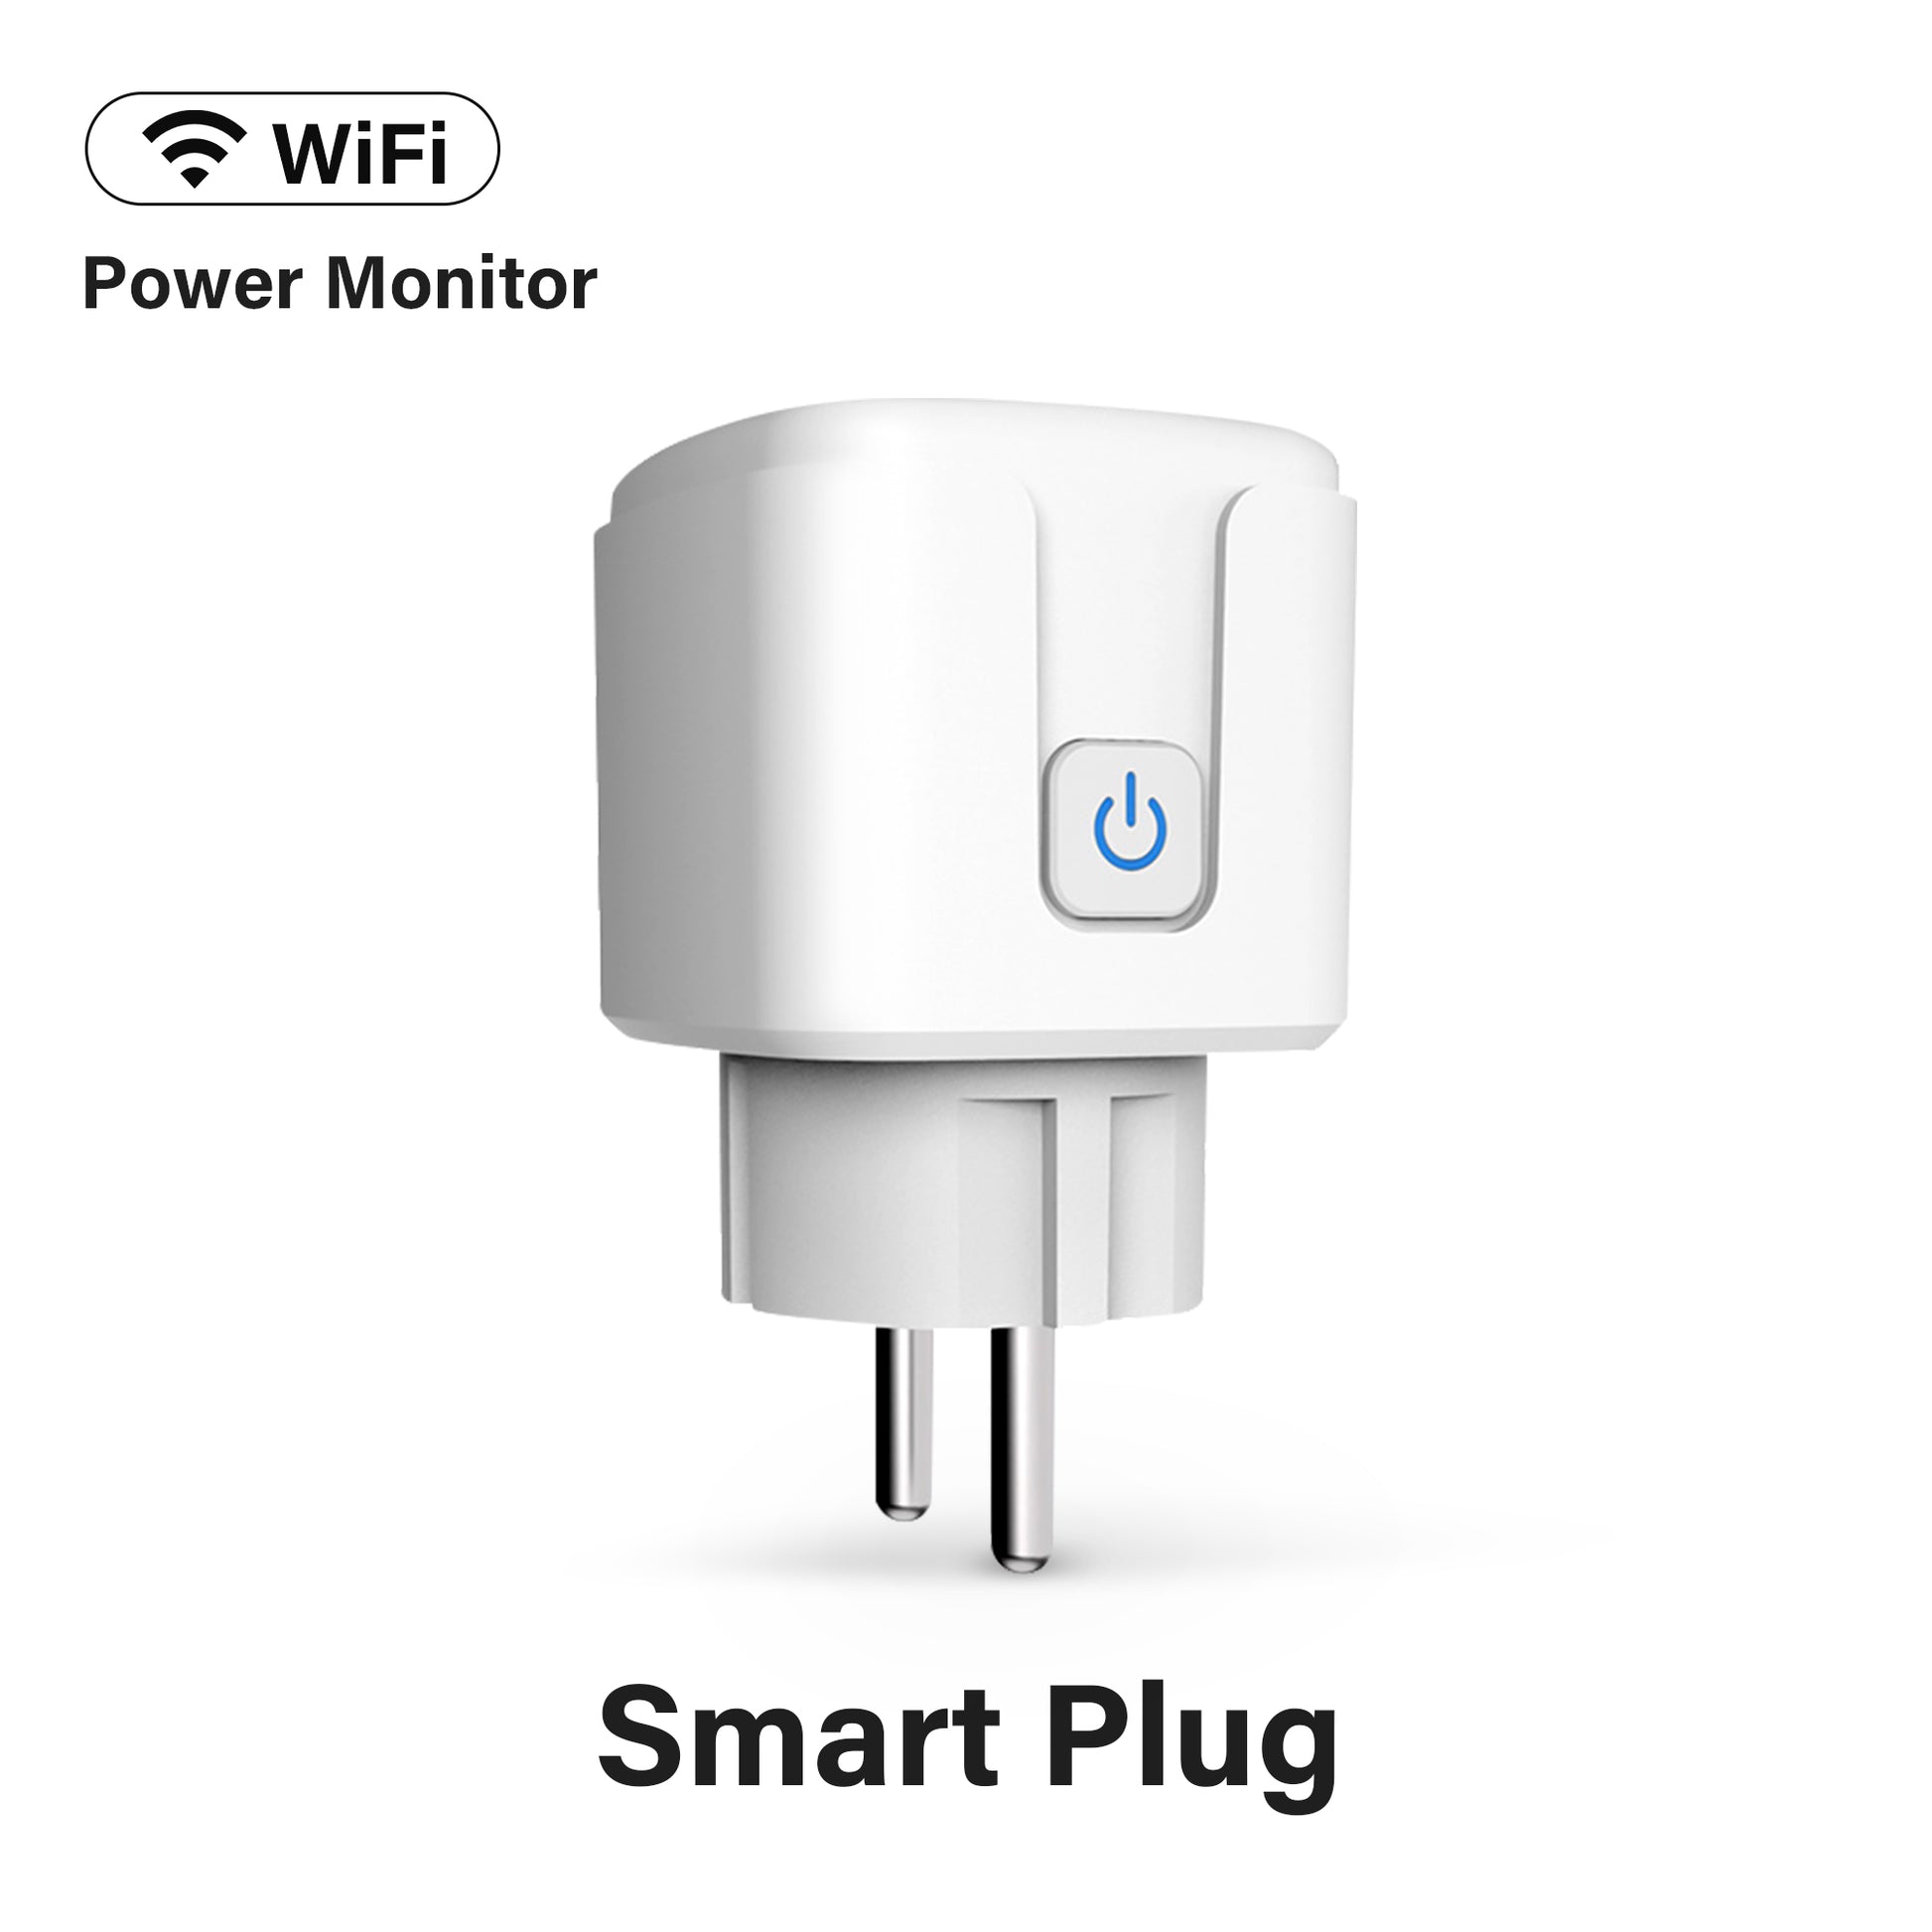 20A Tuya Wifi Smart Plug EU with Power Monitor Function Smart Life App  Remote Control Socket Outlet Works with Alexa Google Home